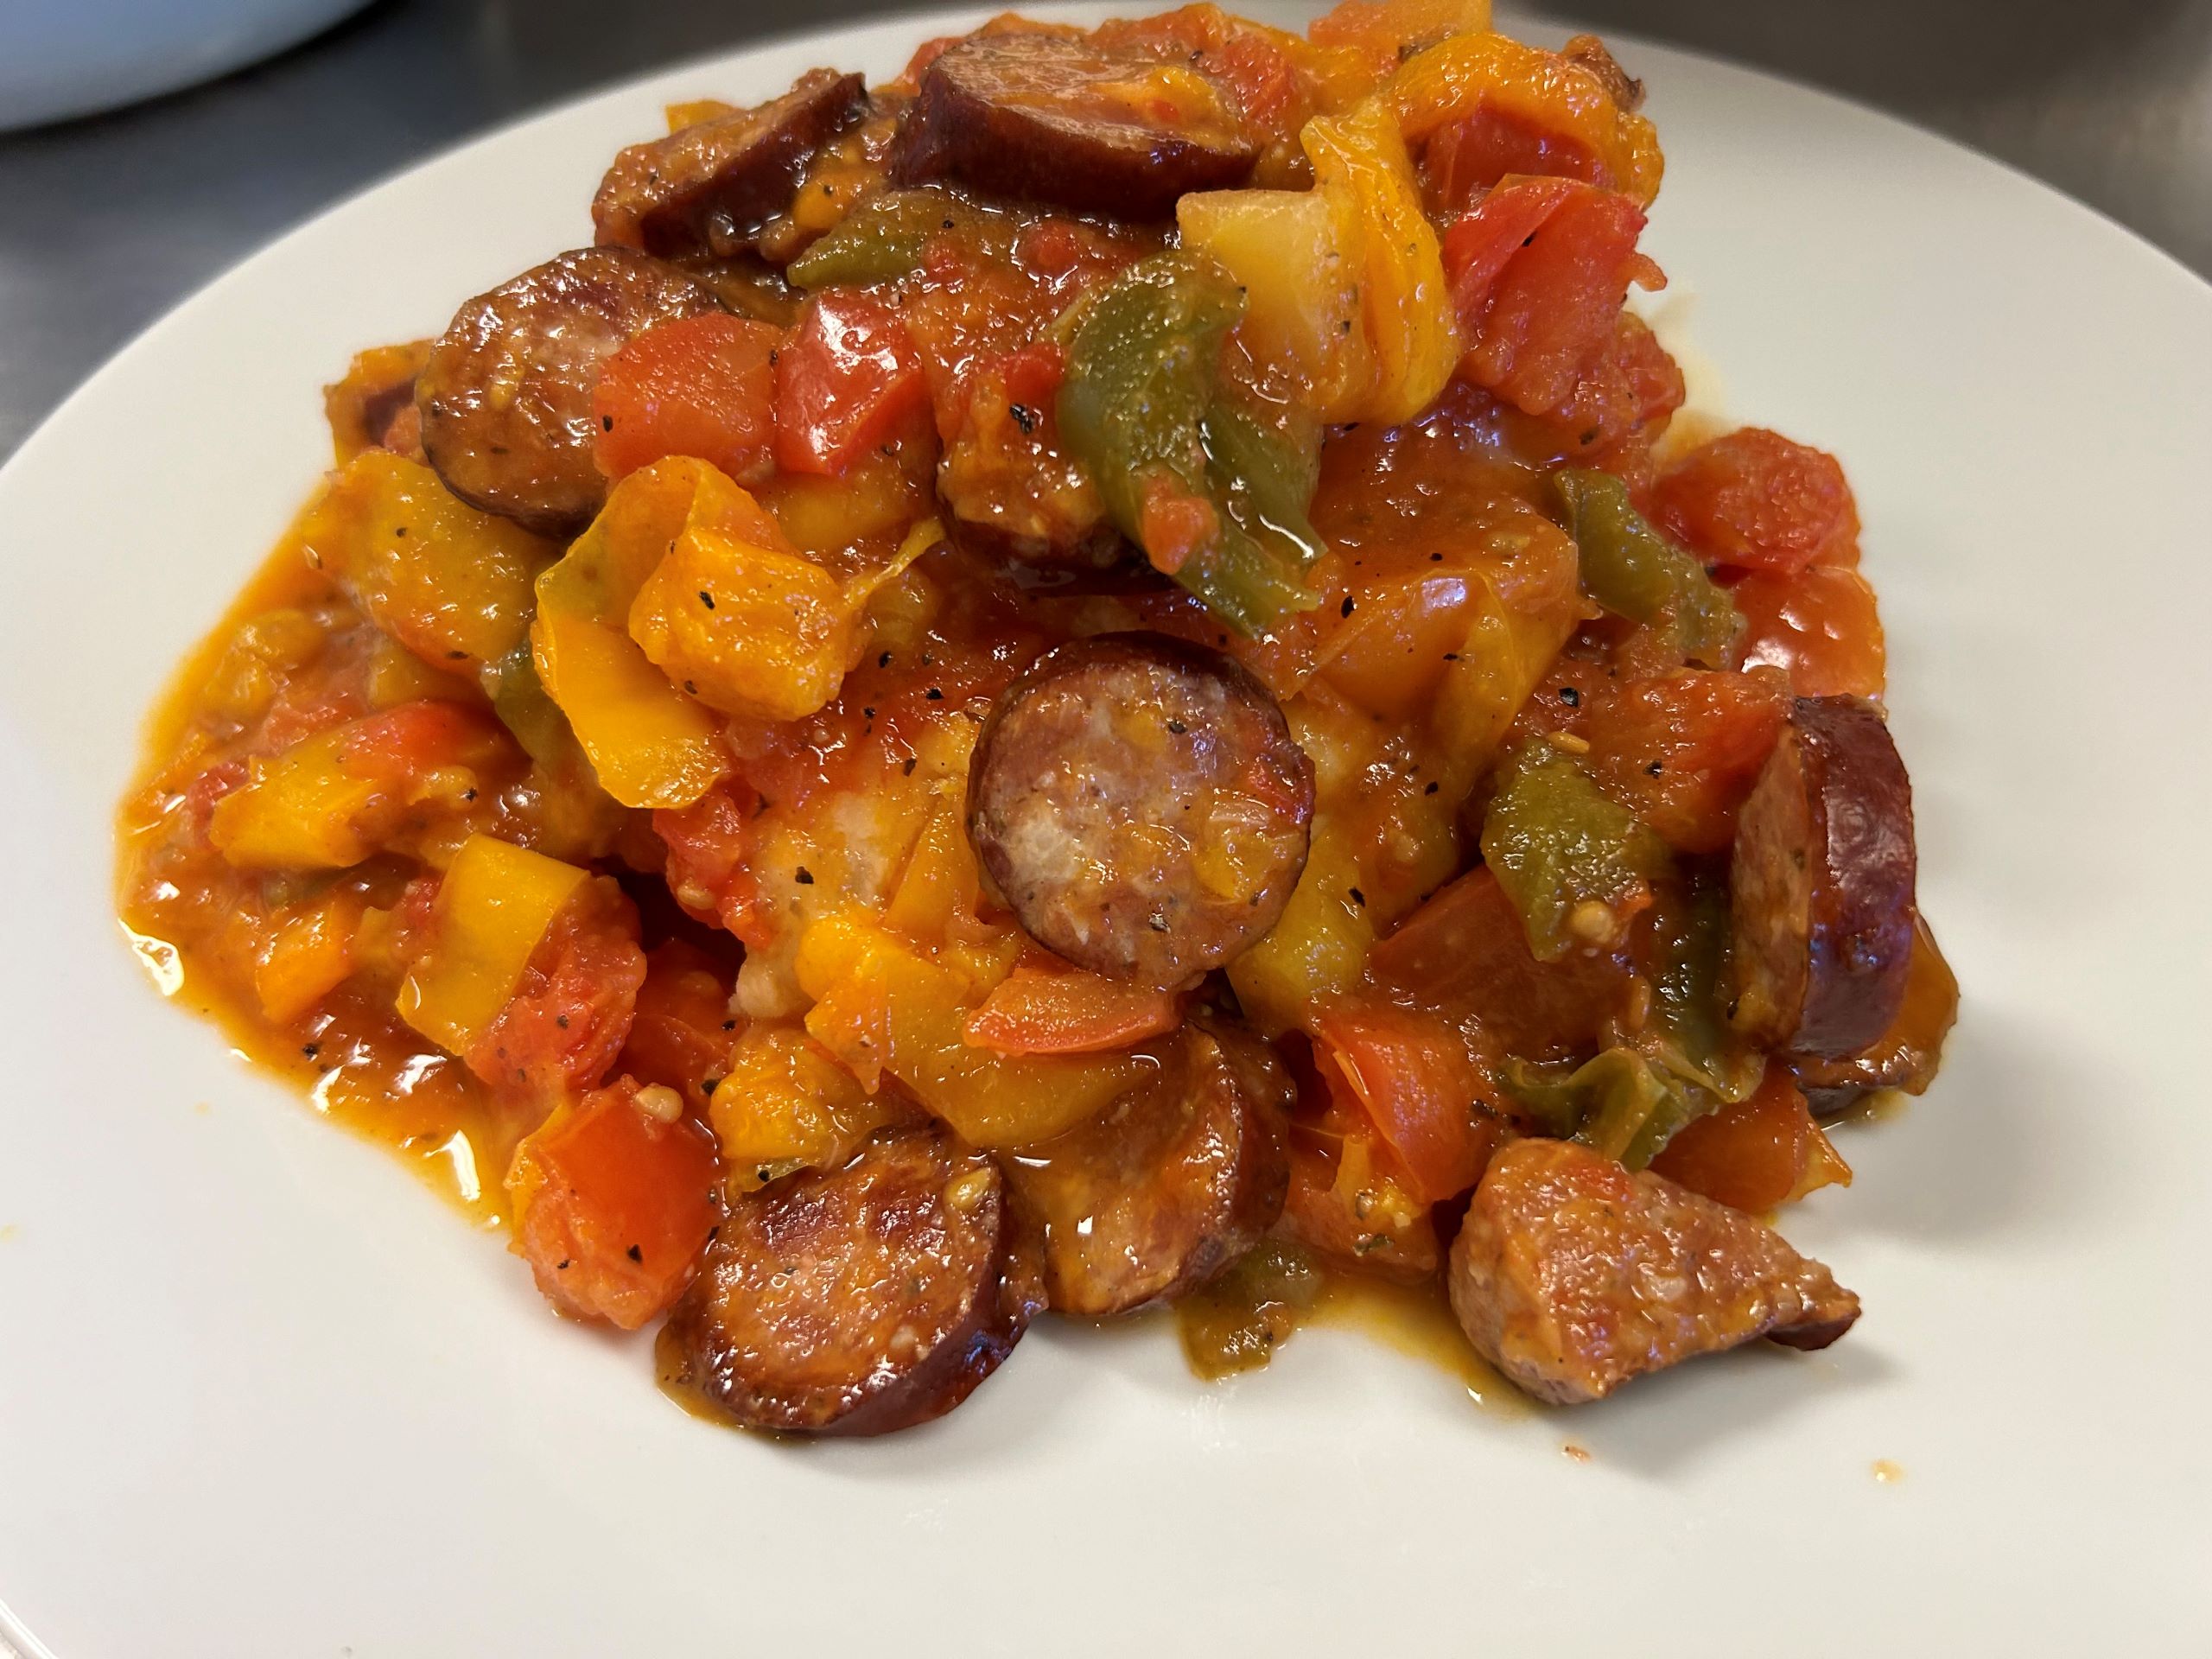 Kat's Letcho Kielbasa Meal having pan-fried kielbasa pieces, sauteed onions and fresh peppers all together on mashed potatoes served on a white plate.